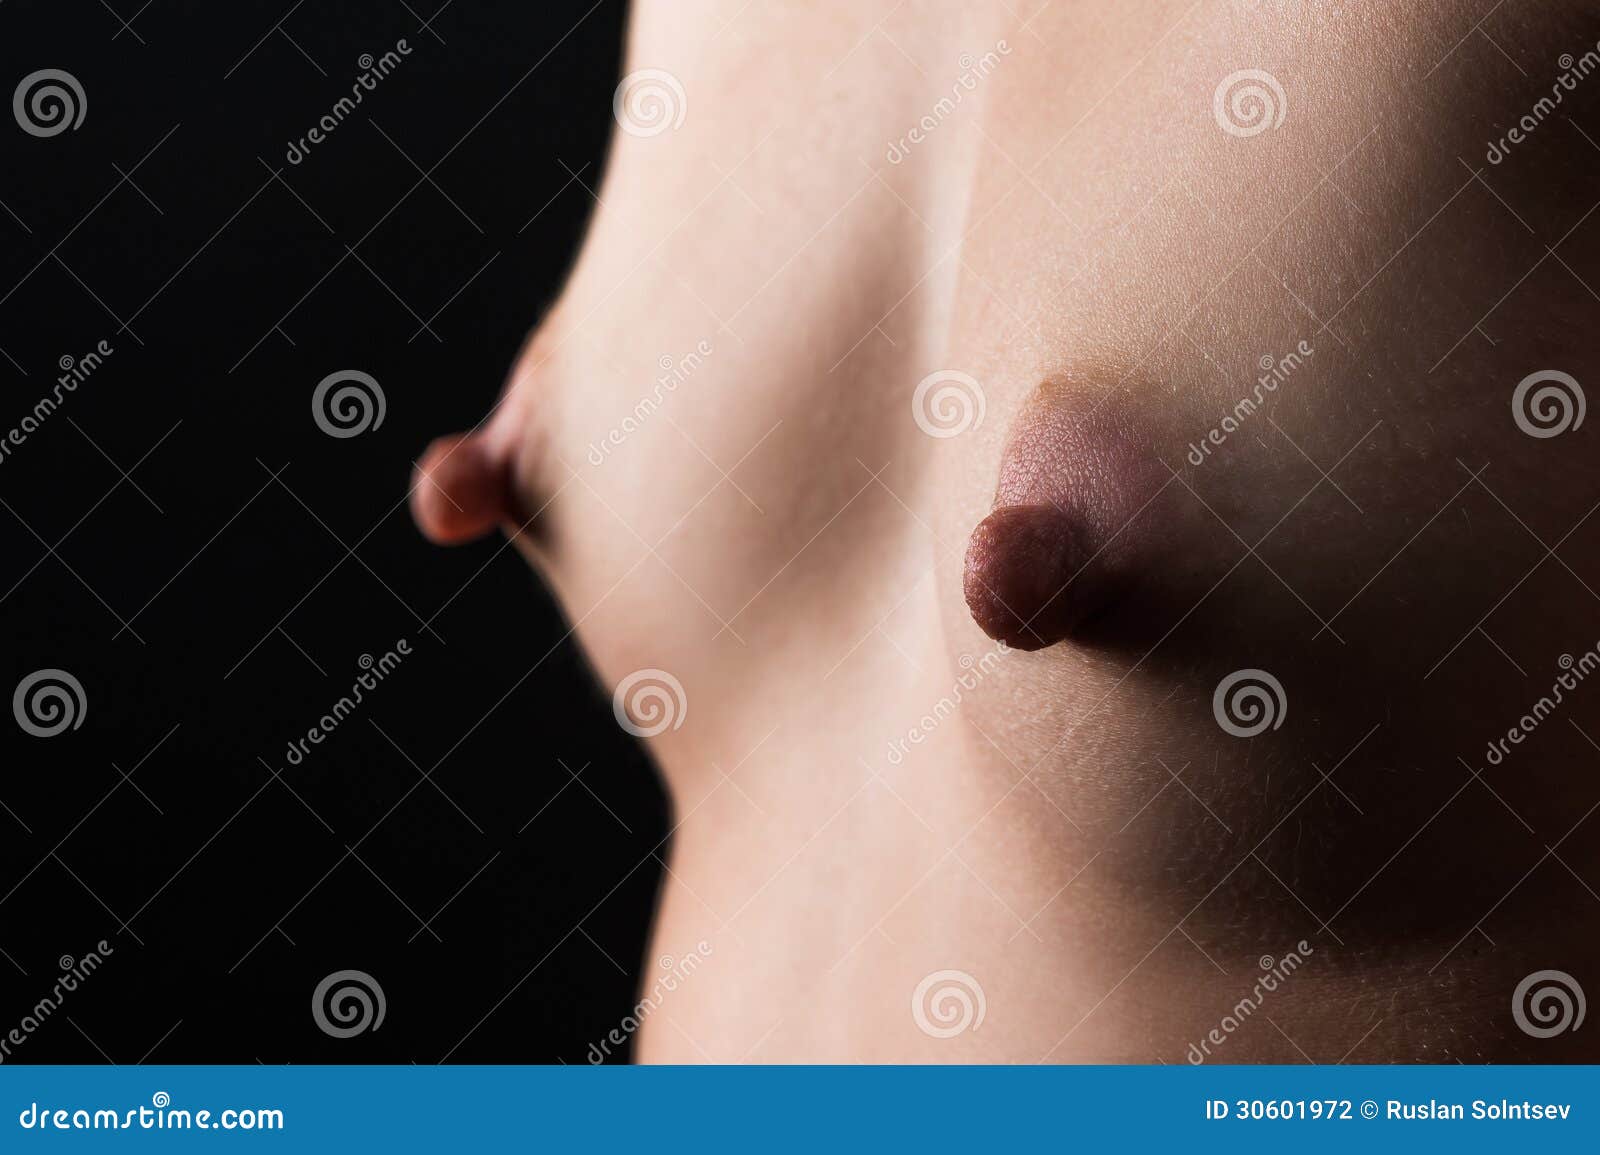 abille recommends boobs with long nipples pic